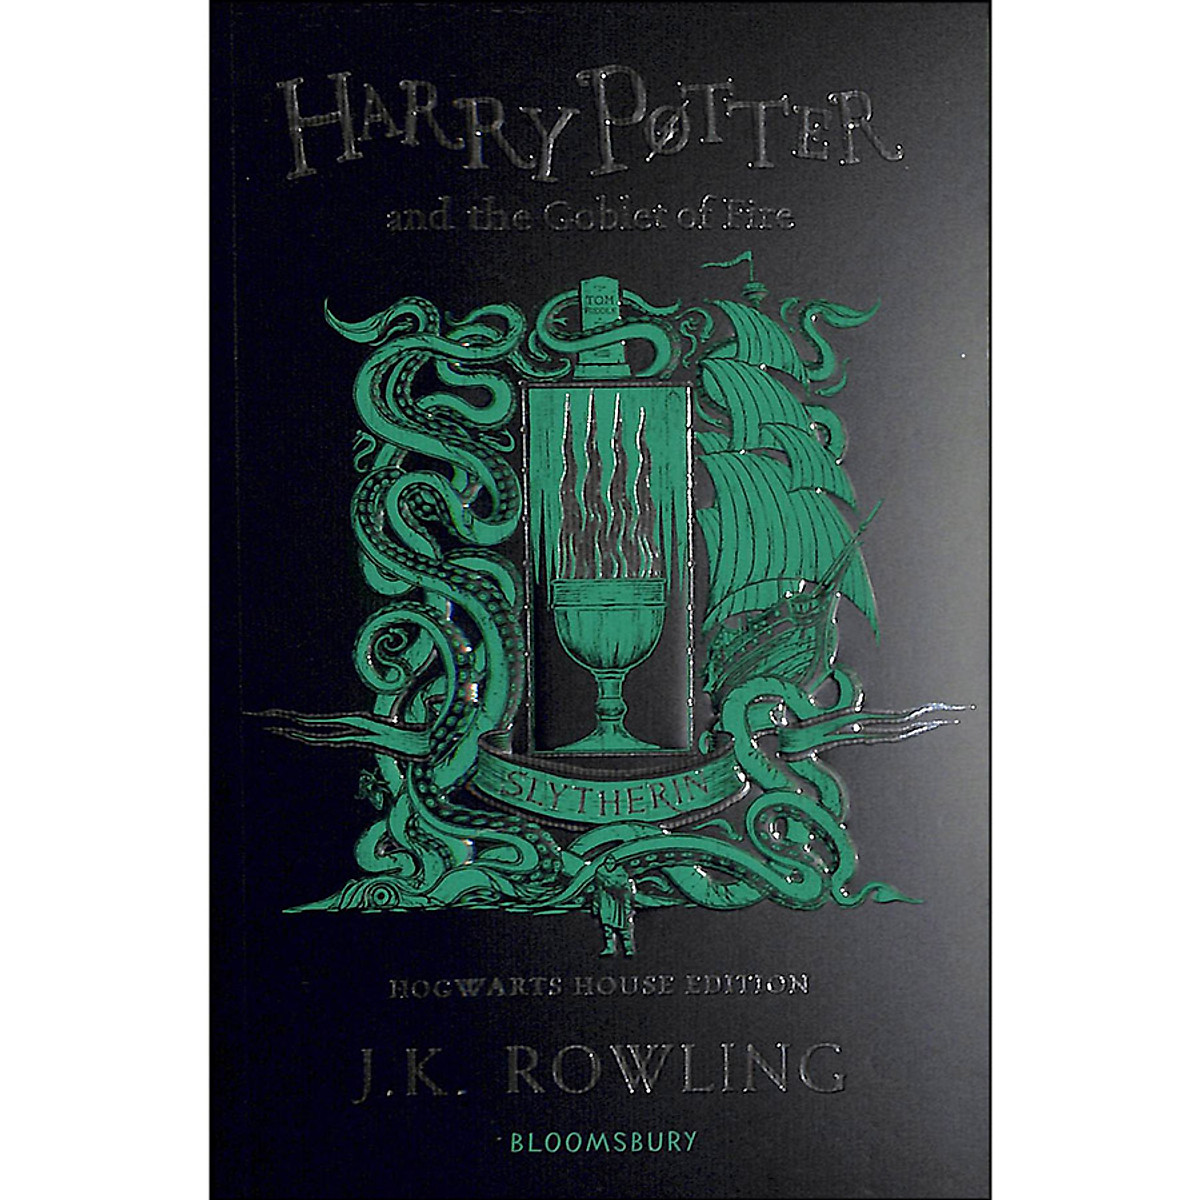 Harry Potter and the Goblet of Fire - Slytherin Edition (Book 4 of 7: Harry Potter Series) (Paperback)